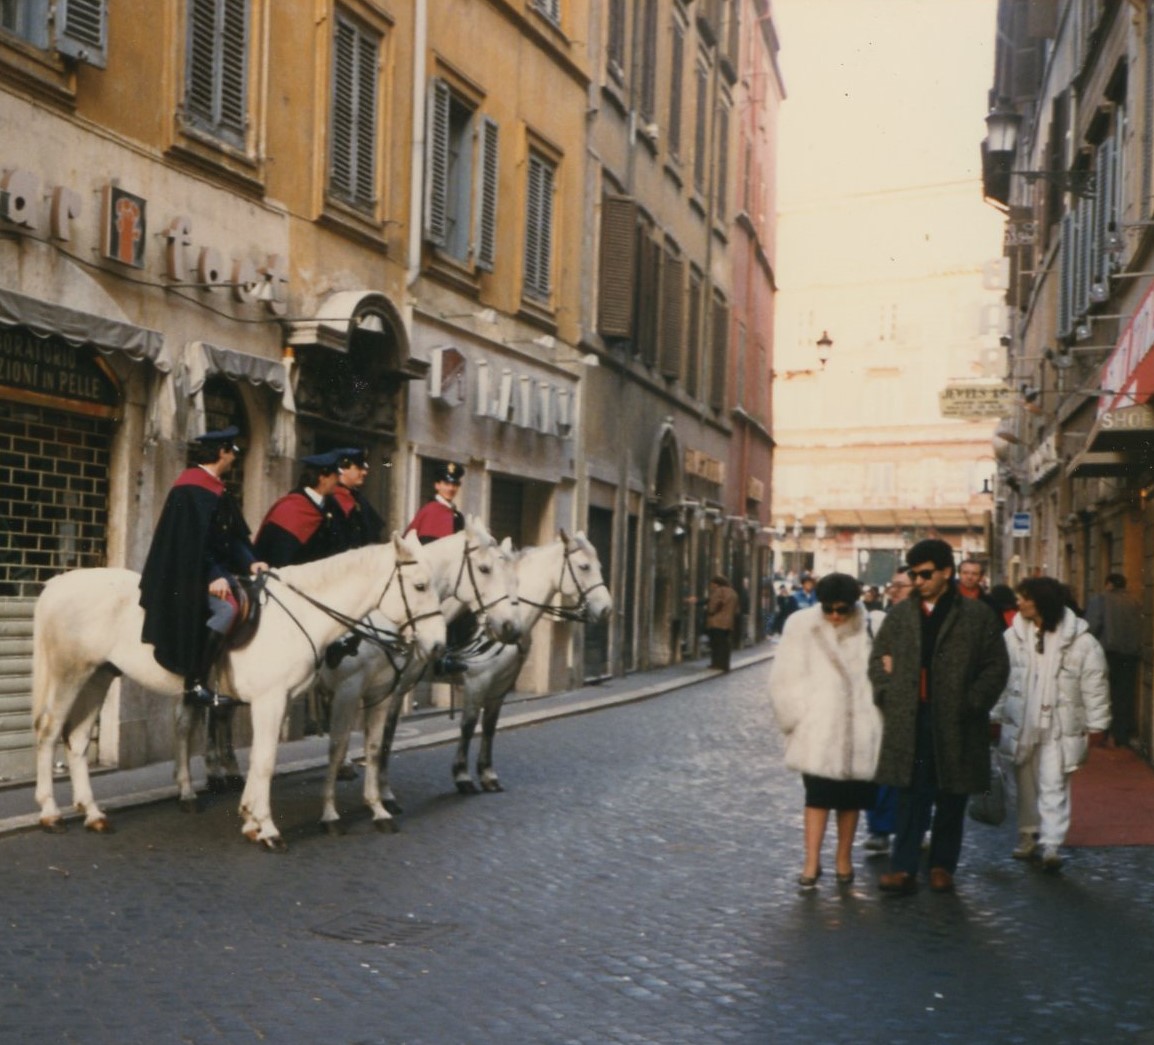 A typical scene in the streets of Rome, mounted police, the carabinieri.